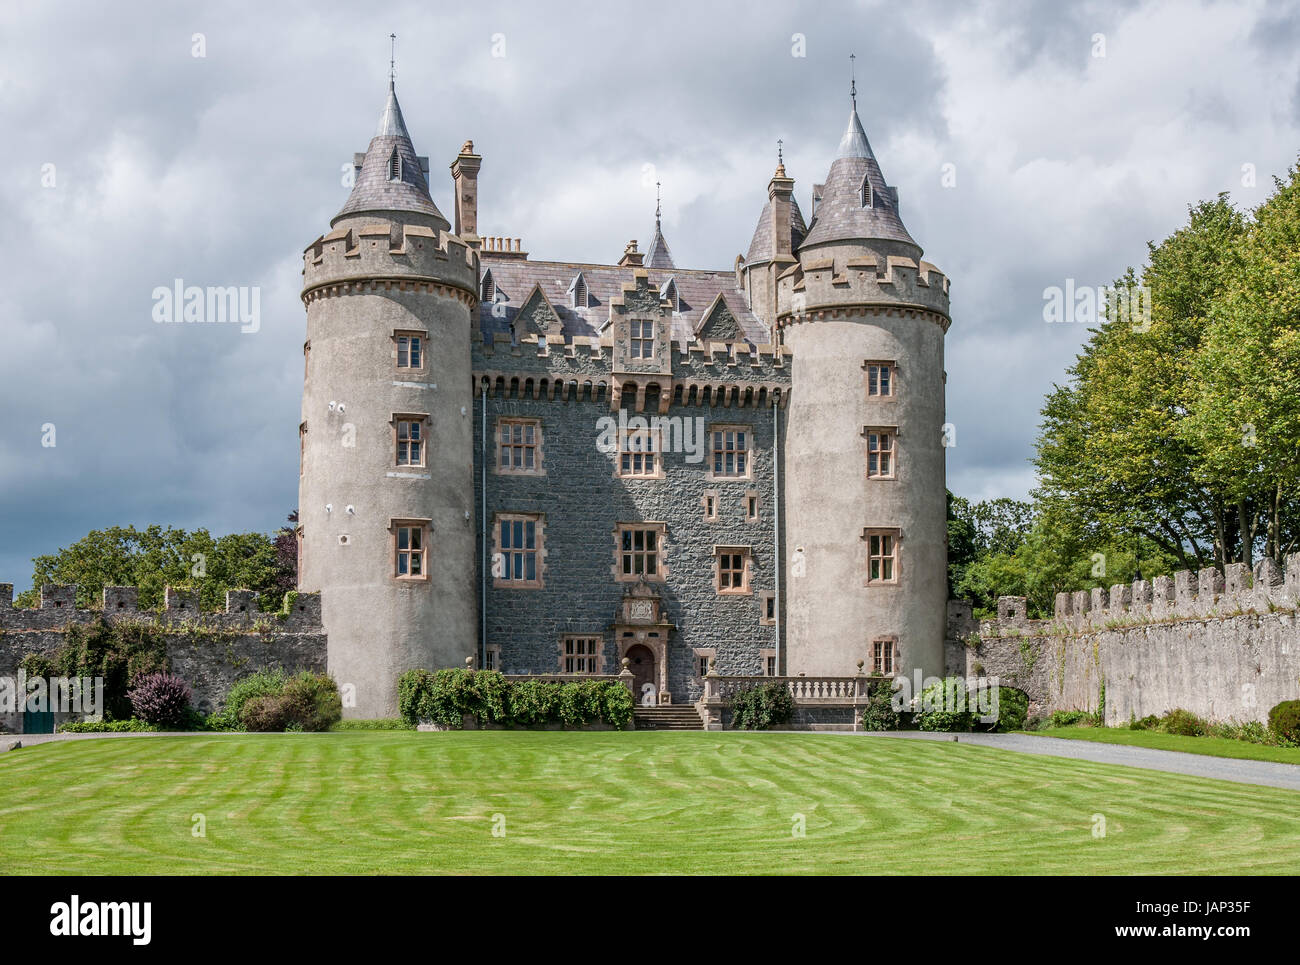 KILLYLEAGH, NORTHERN IRELAND, UK - AUGUST 1, 2015: Killyleagh Castle in Caunty Down, Northern Ireland, UK. It dates back to 12th century but then was  Stock Photo